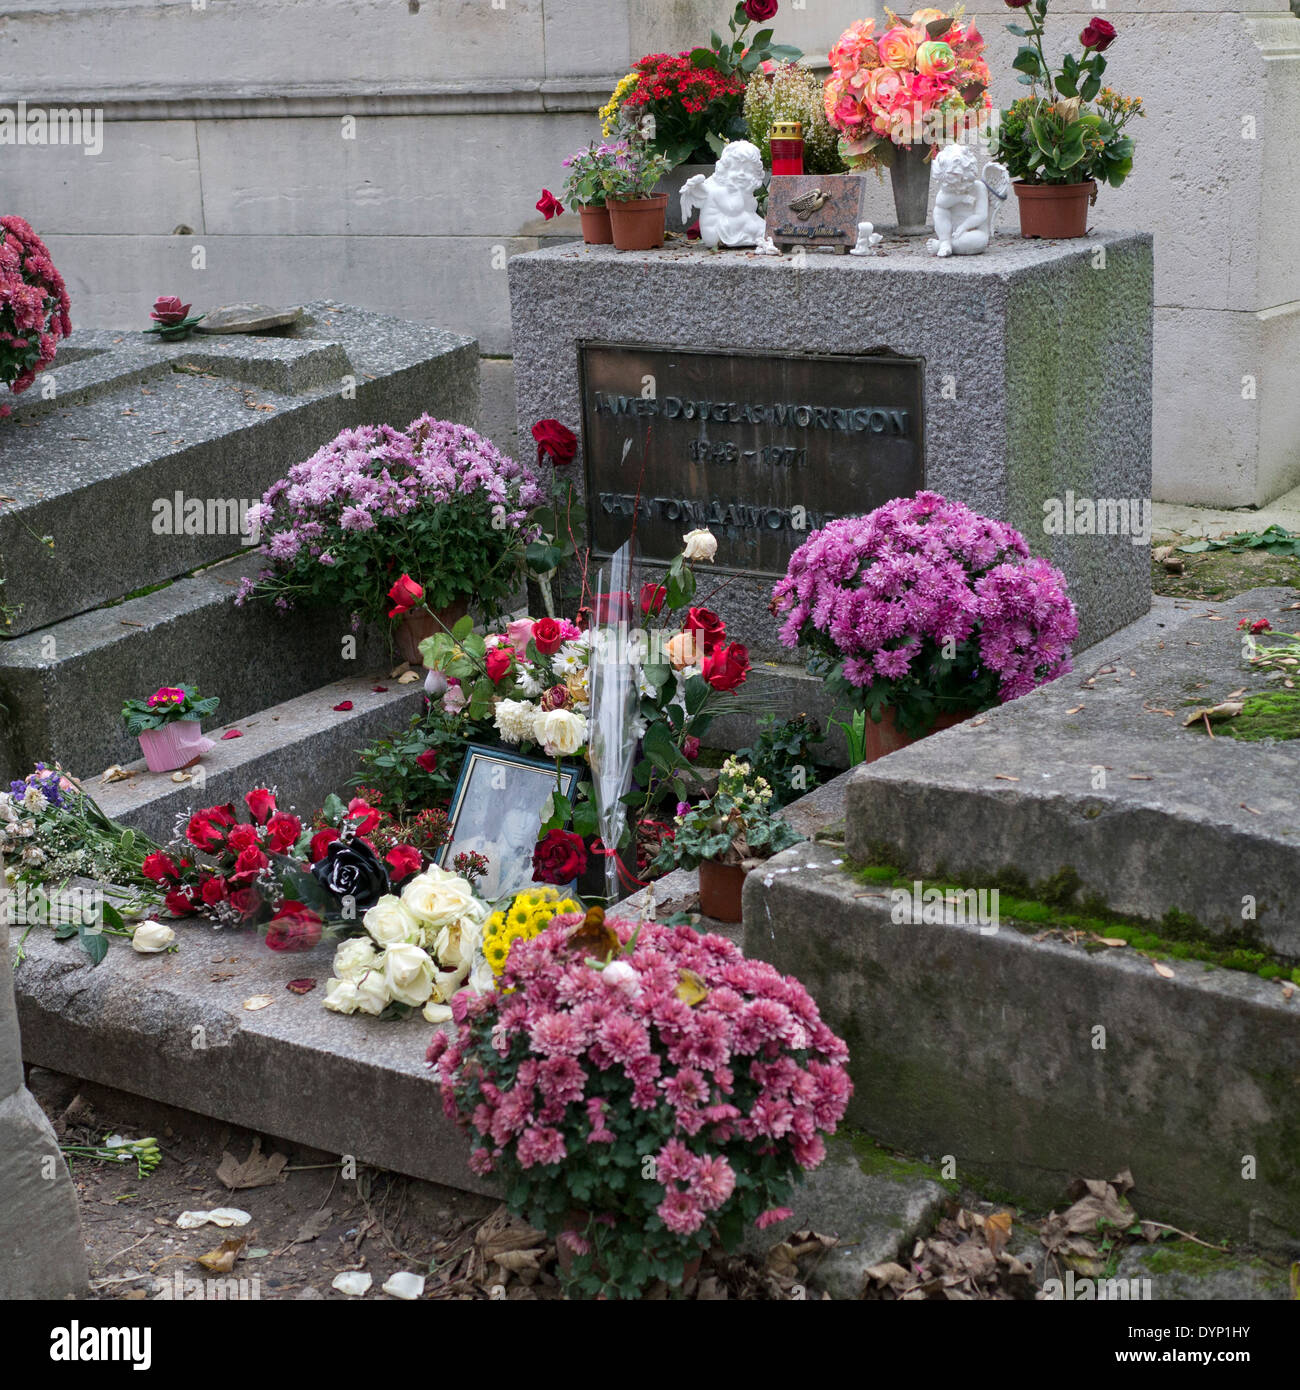 Grave of Jim Morrison, lead singer of the Doors rock band in Père Lachaise cemetery in Paris Stock Photo